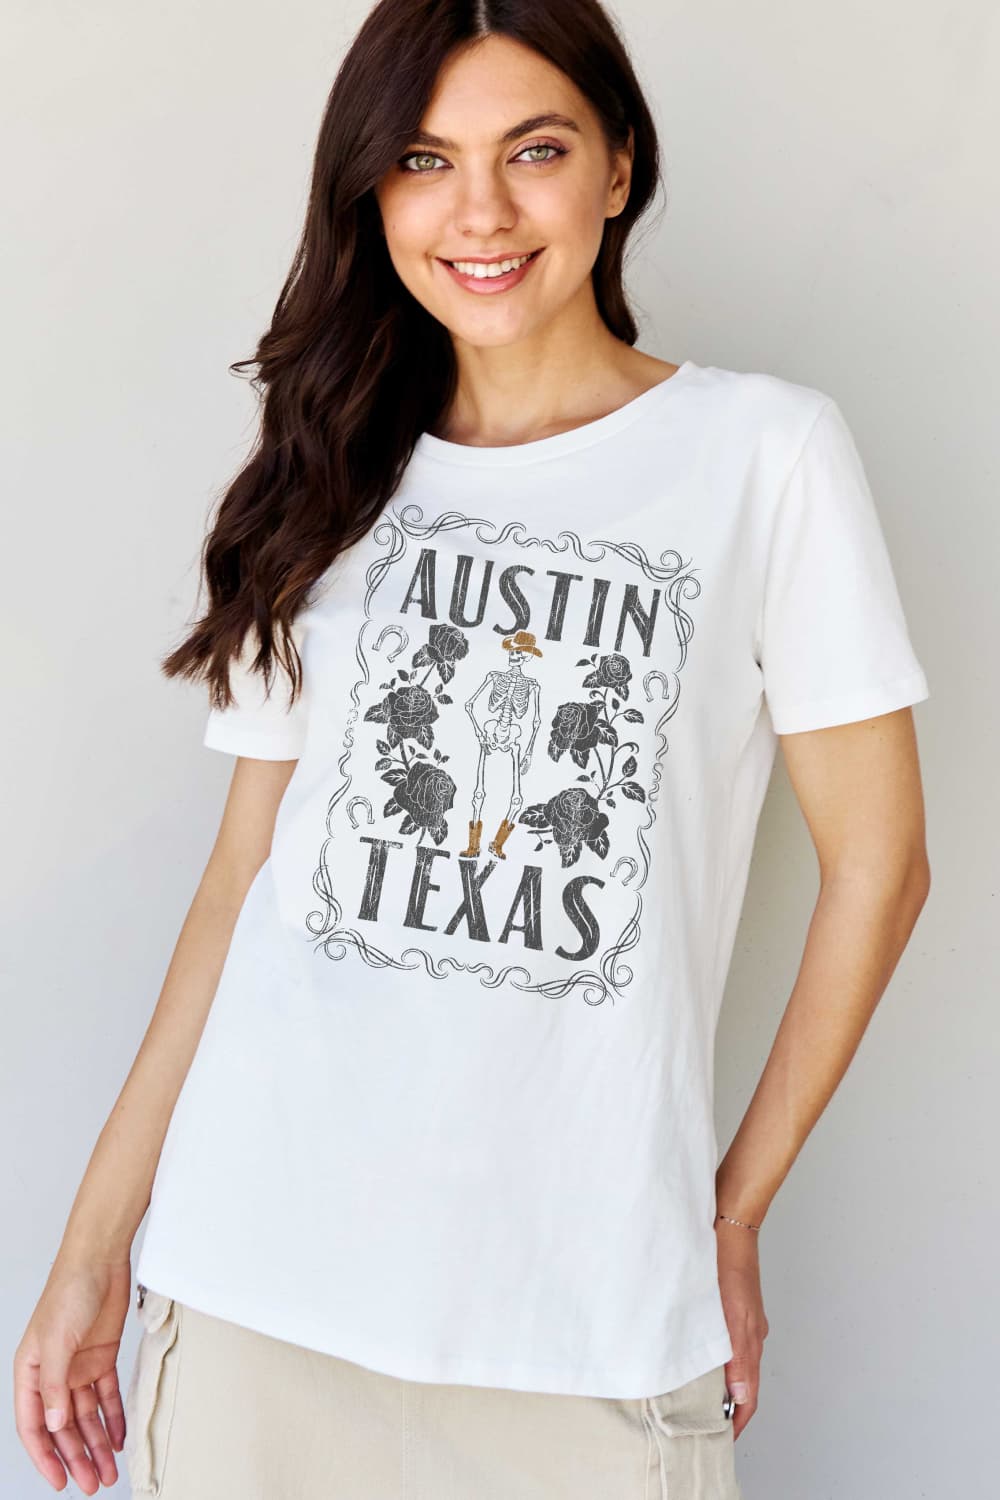 Simply Love Graphic T-shirts Full Size AUSTIN  TEXAS Graphic Cotton T-Shirt